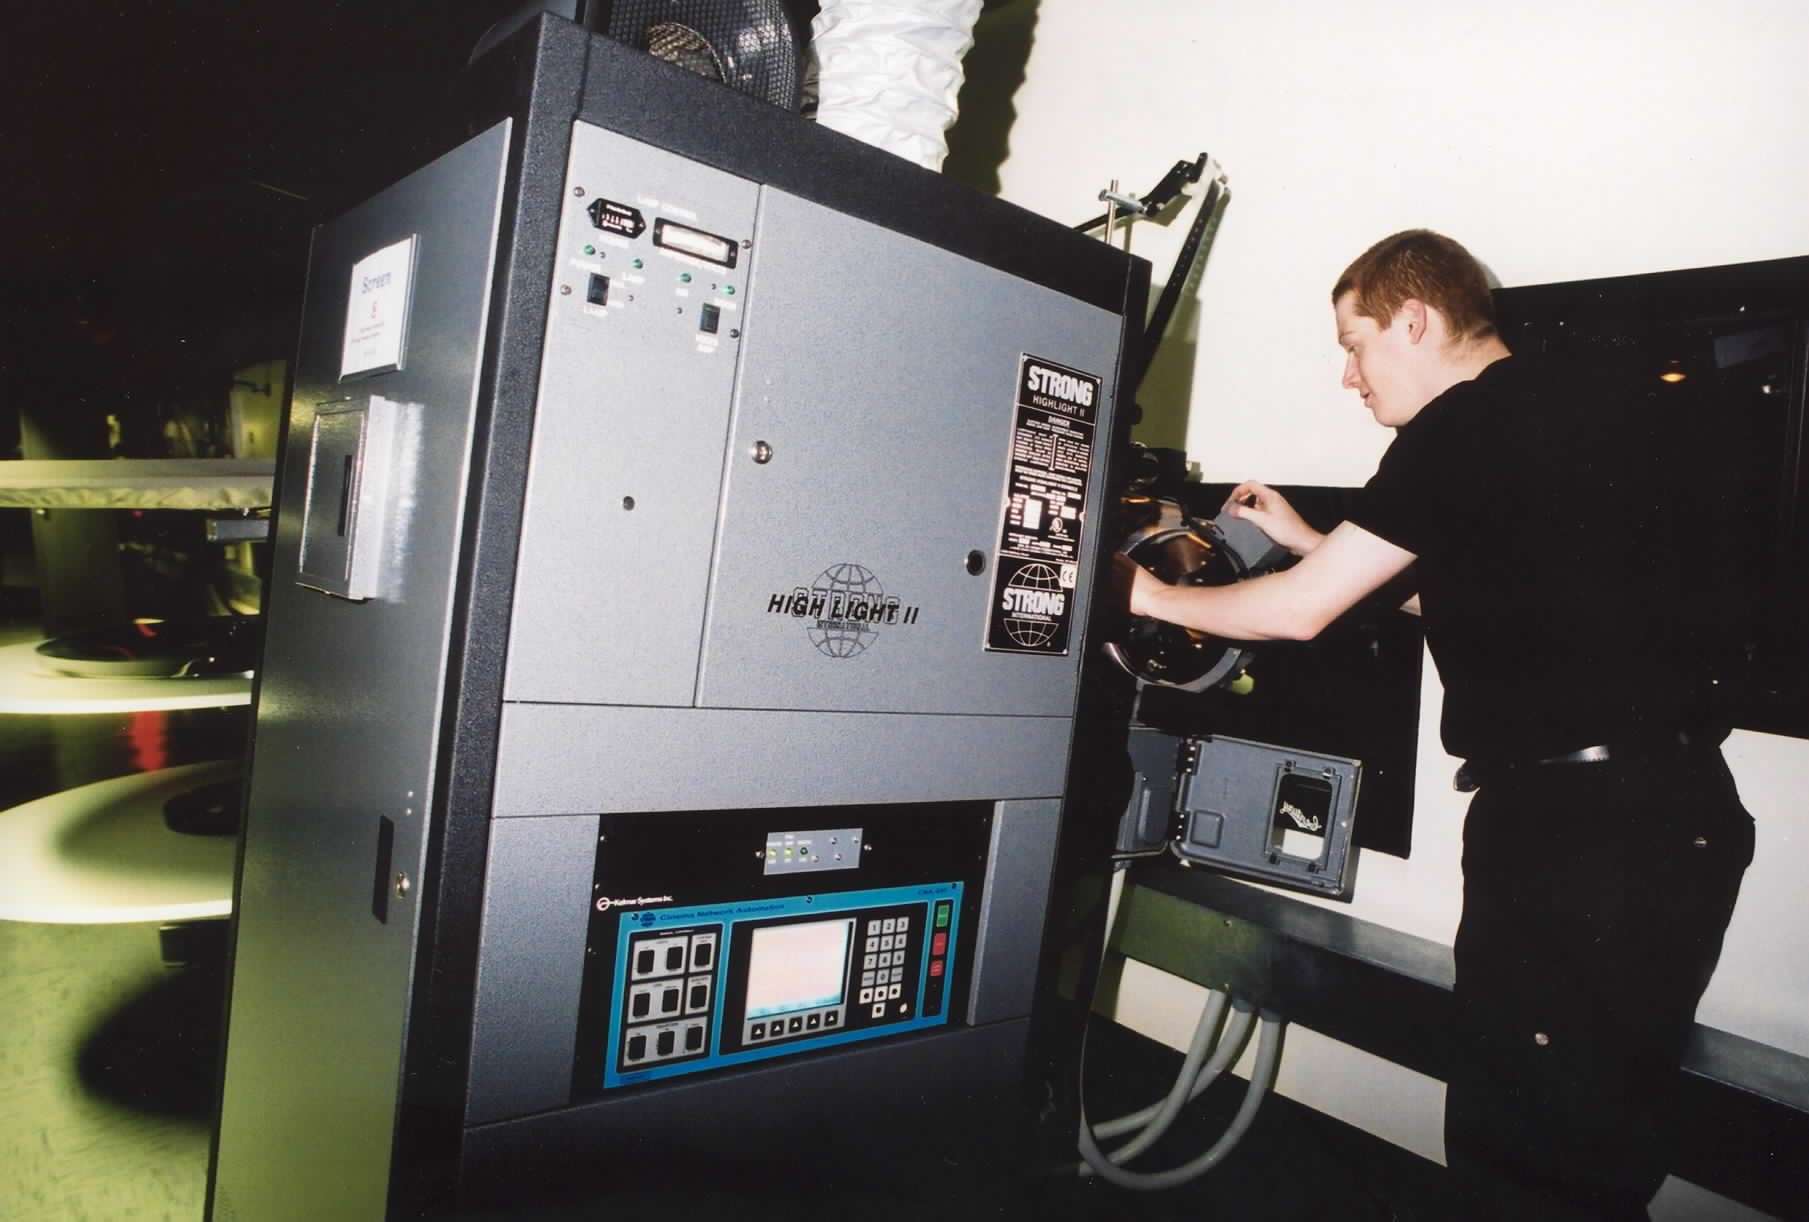 It's showtime! A projectionist at work in the early days of Ashford's Cineworld